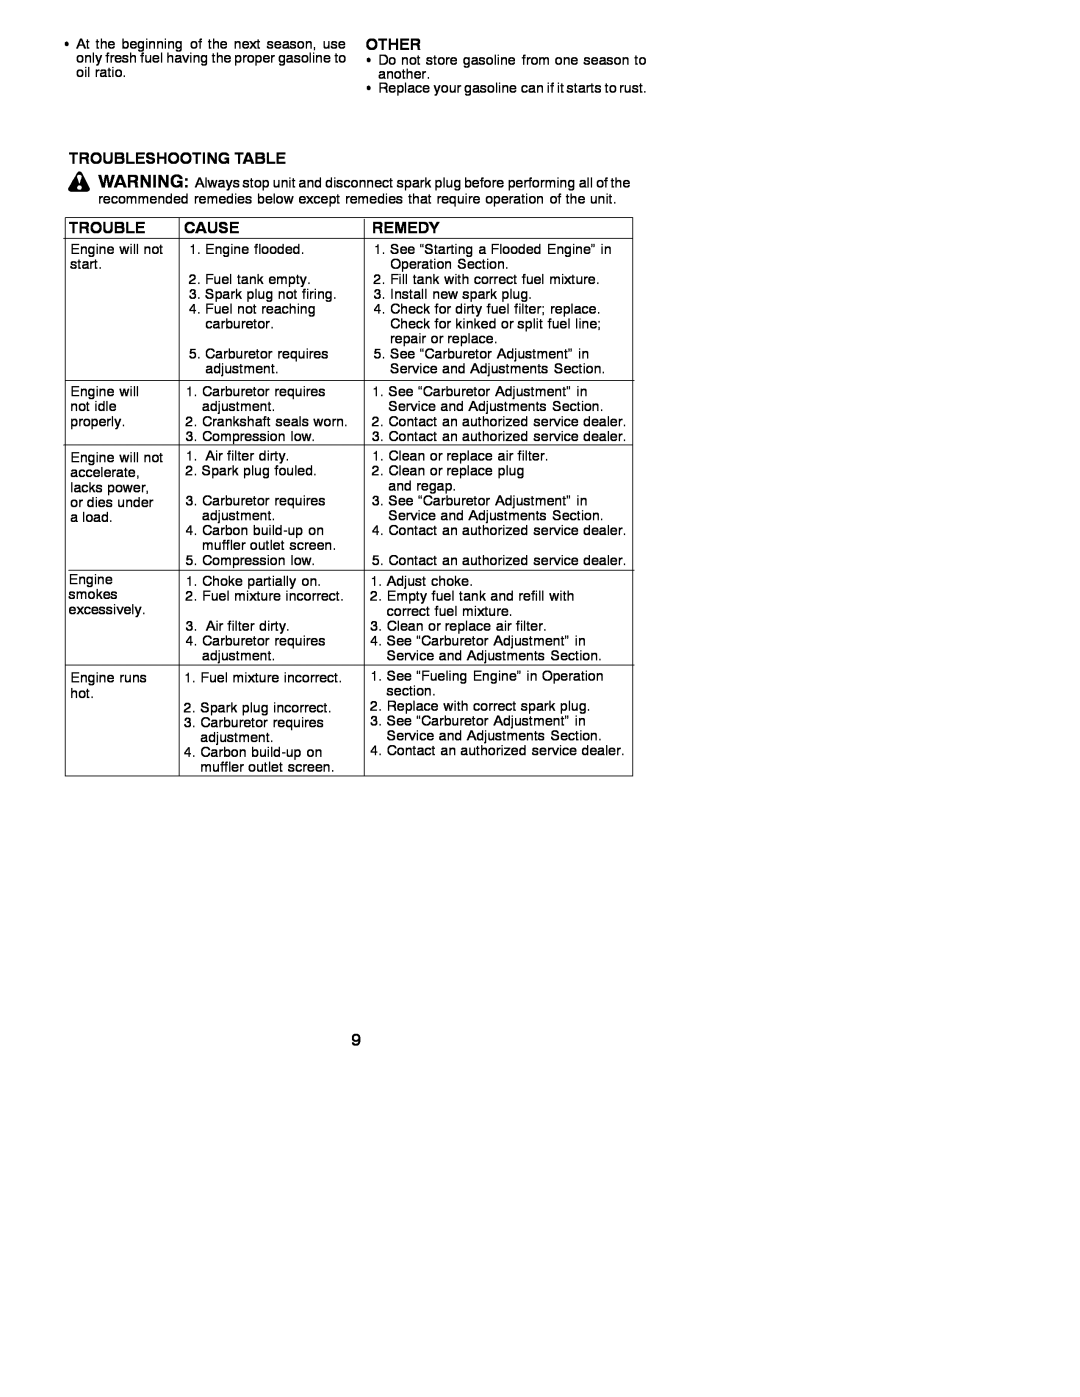 Poulan PL500 instruction manual Troubleshooting Table, Other, Cause, Remedy 